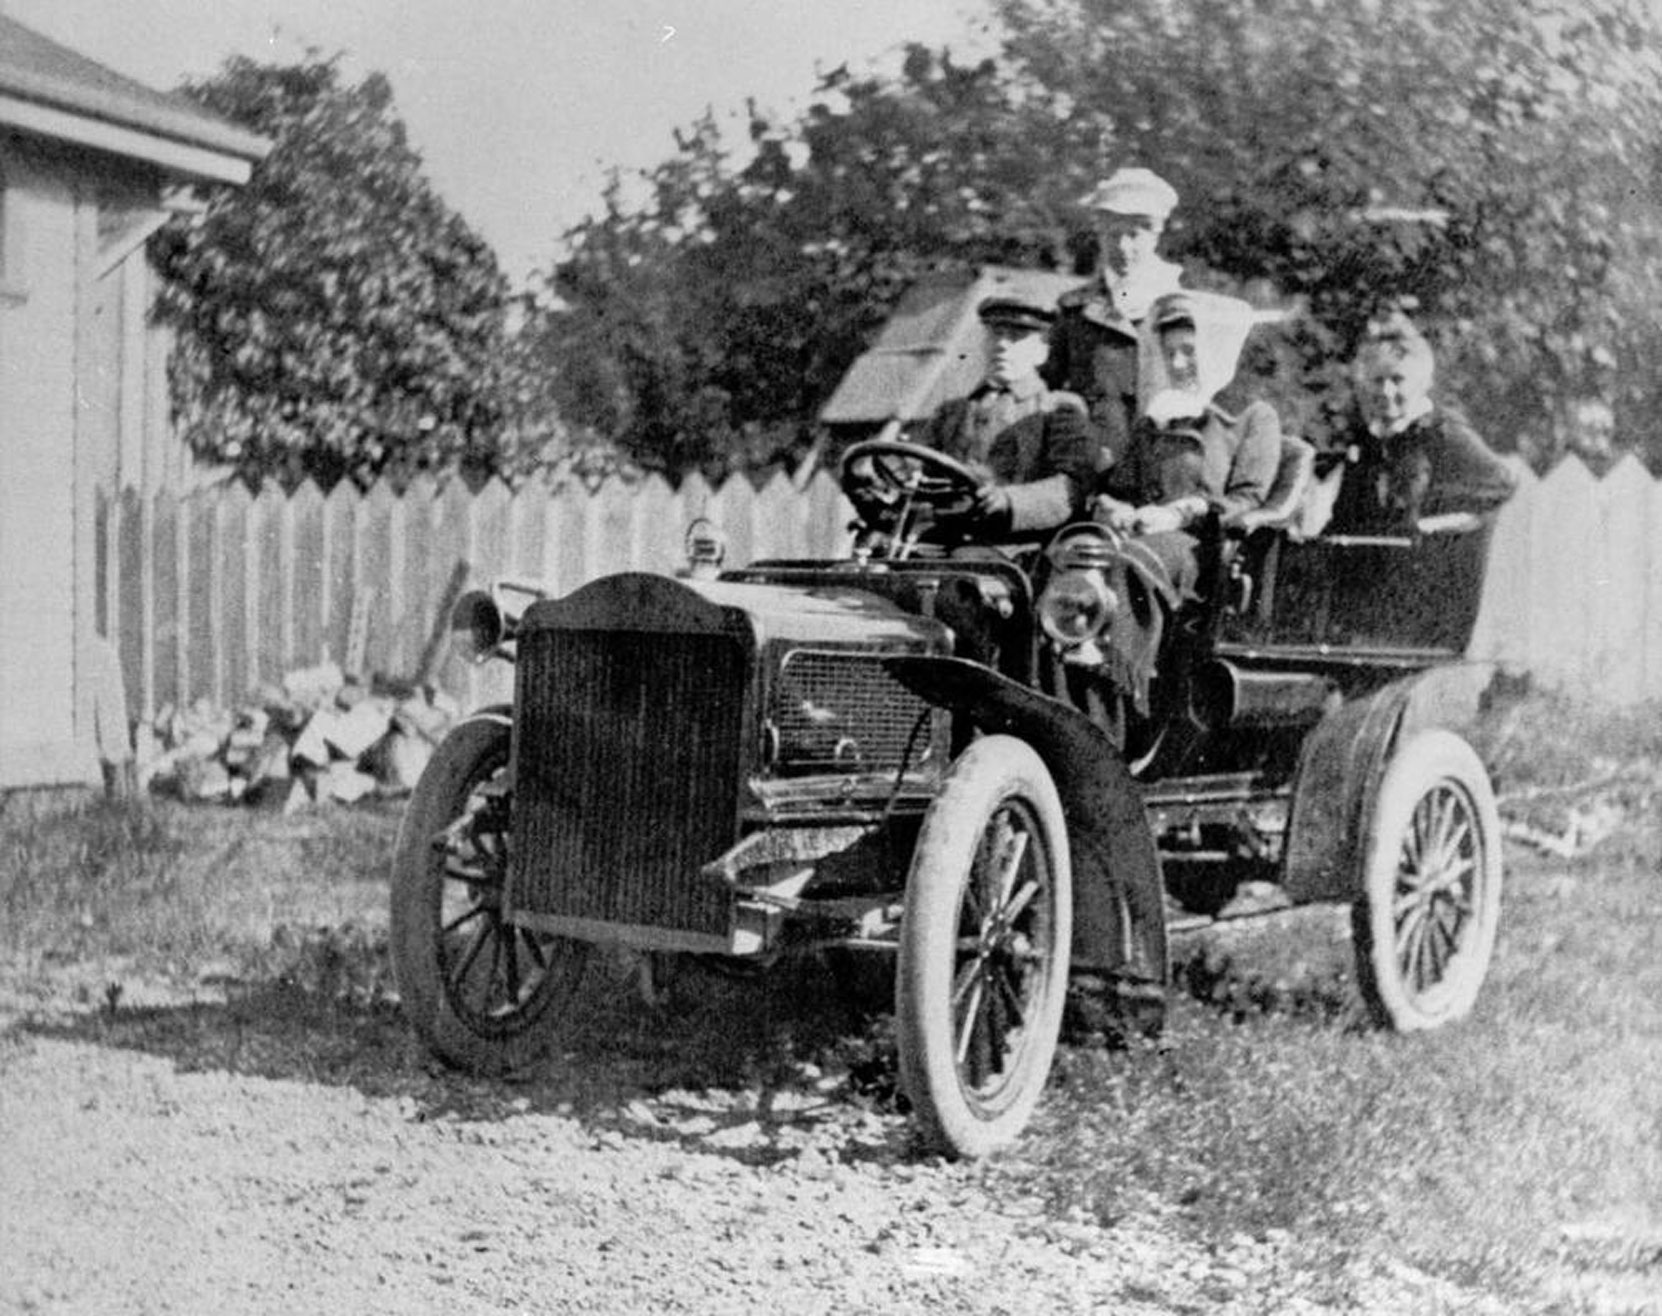 Albert Edward Todd with his family in his White Steam car, Victoria, 1905. Robert Butchart also owned a White Steamer in 1905 [BC Archives photo G-07919]